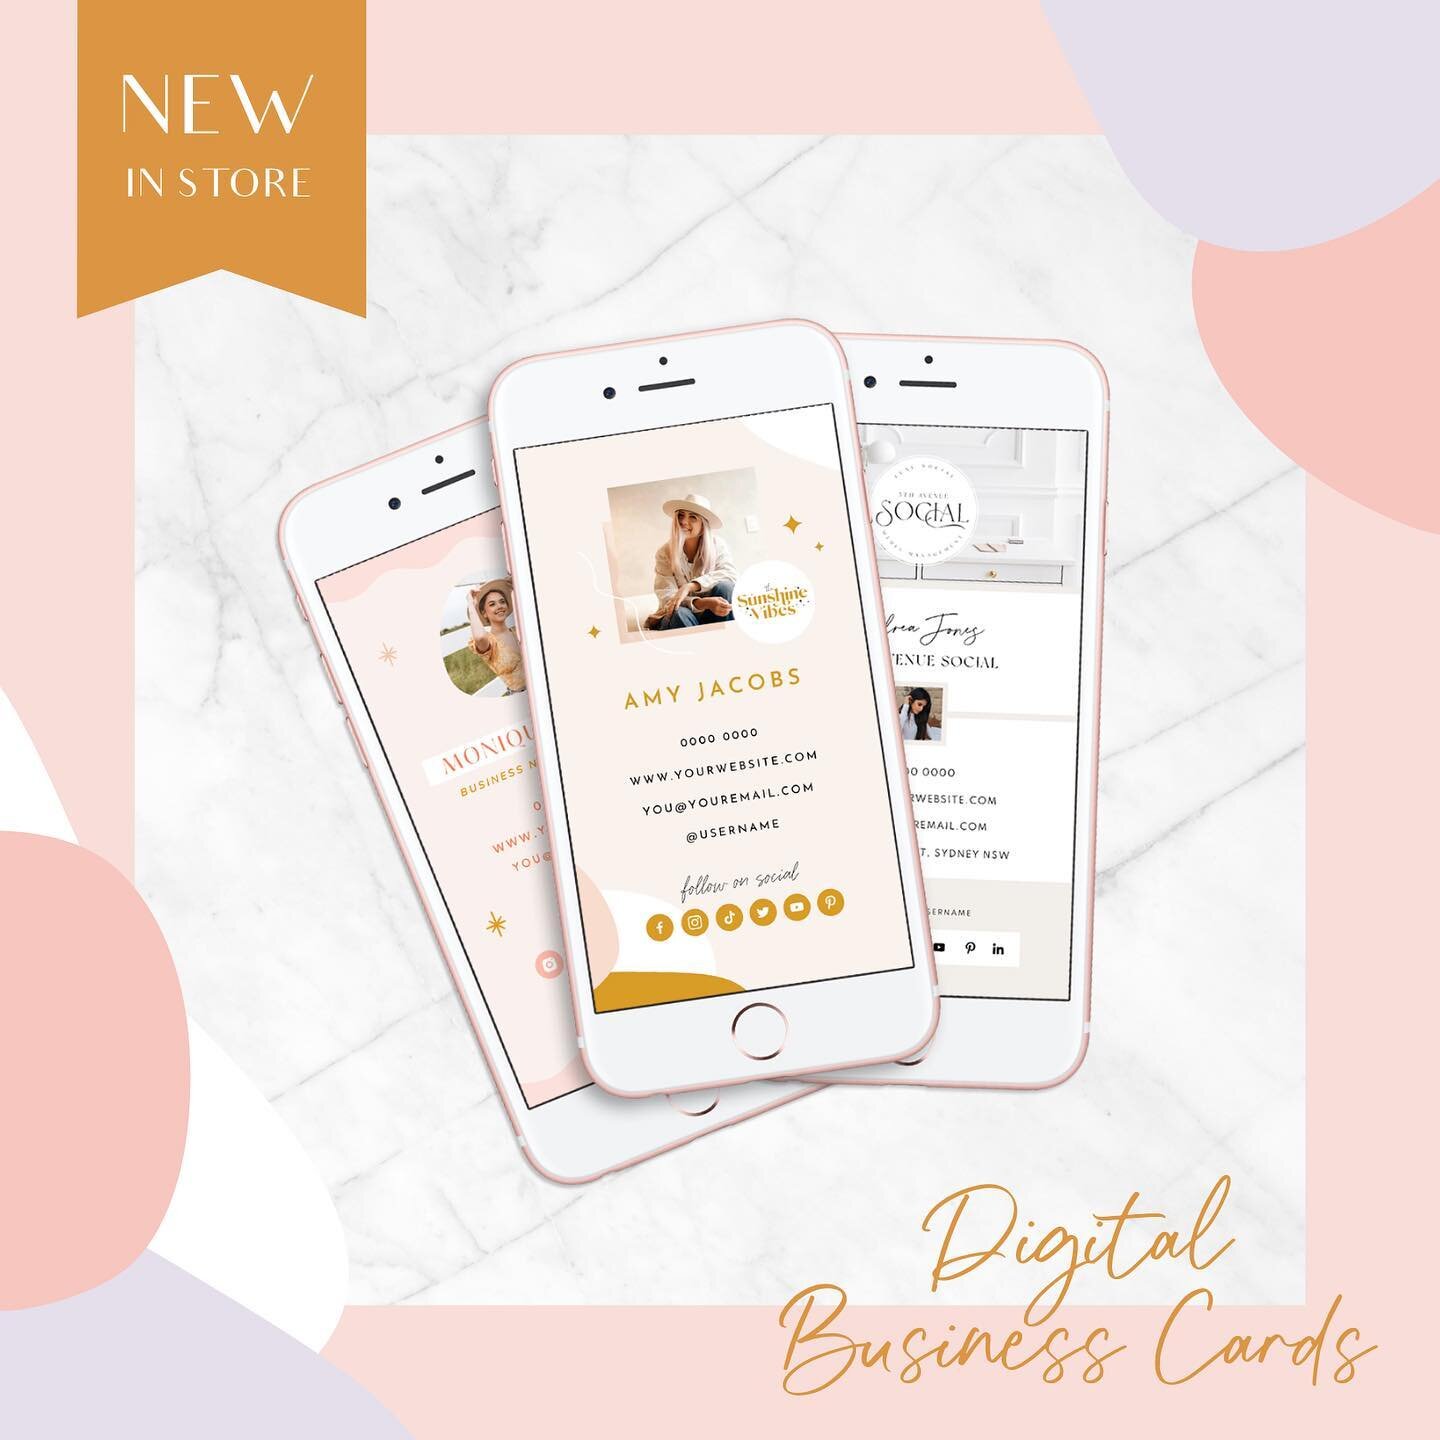 NEW ✨ Digital business card templates 💗 Always have your business card ready on your phone to send to anyone you meet, no physical cards needed! Find them in the Blog Pixie shop 👛